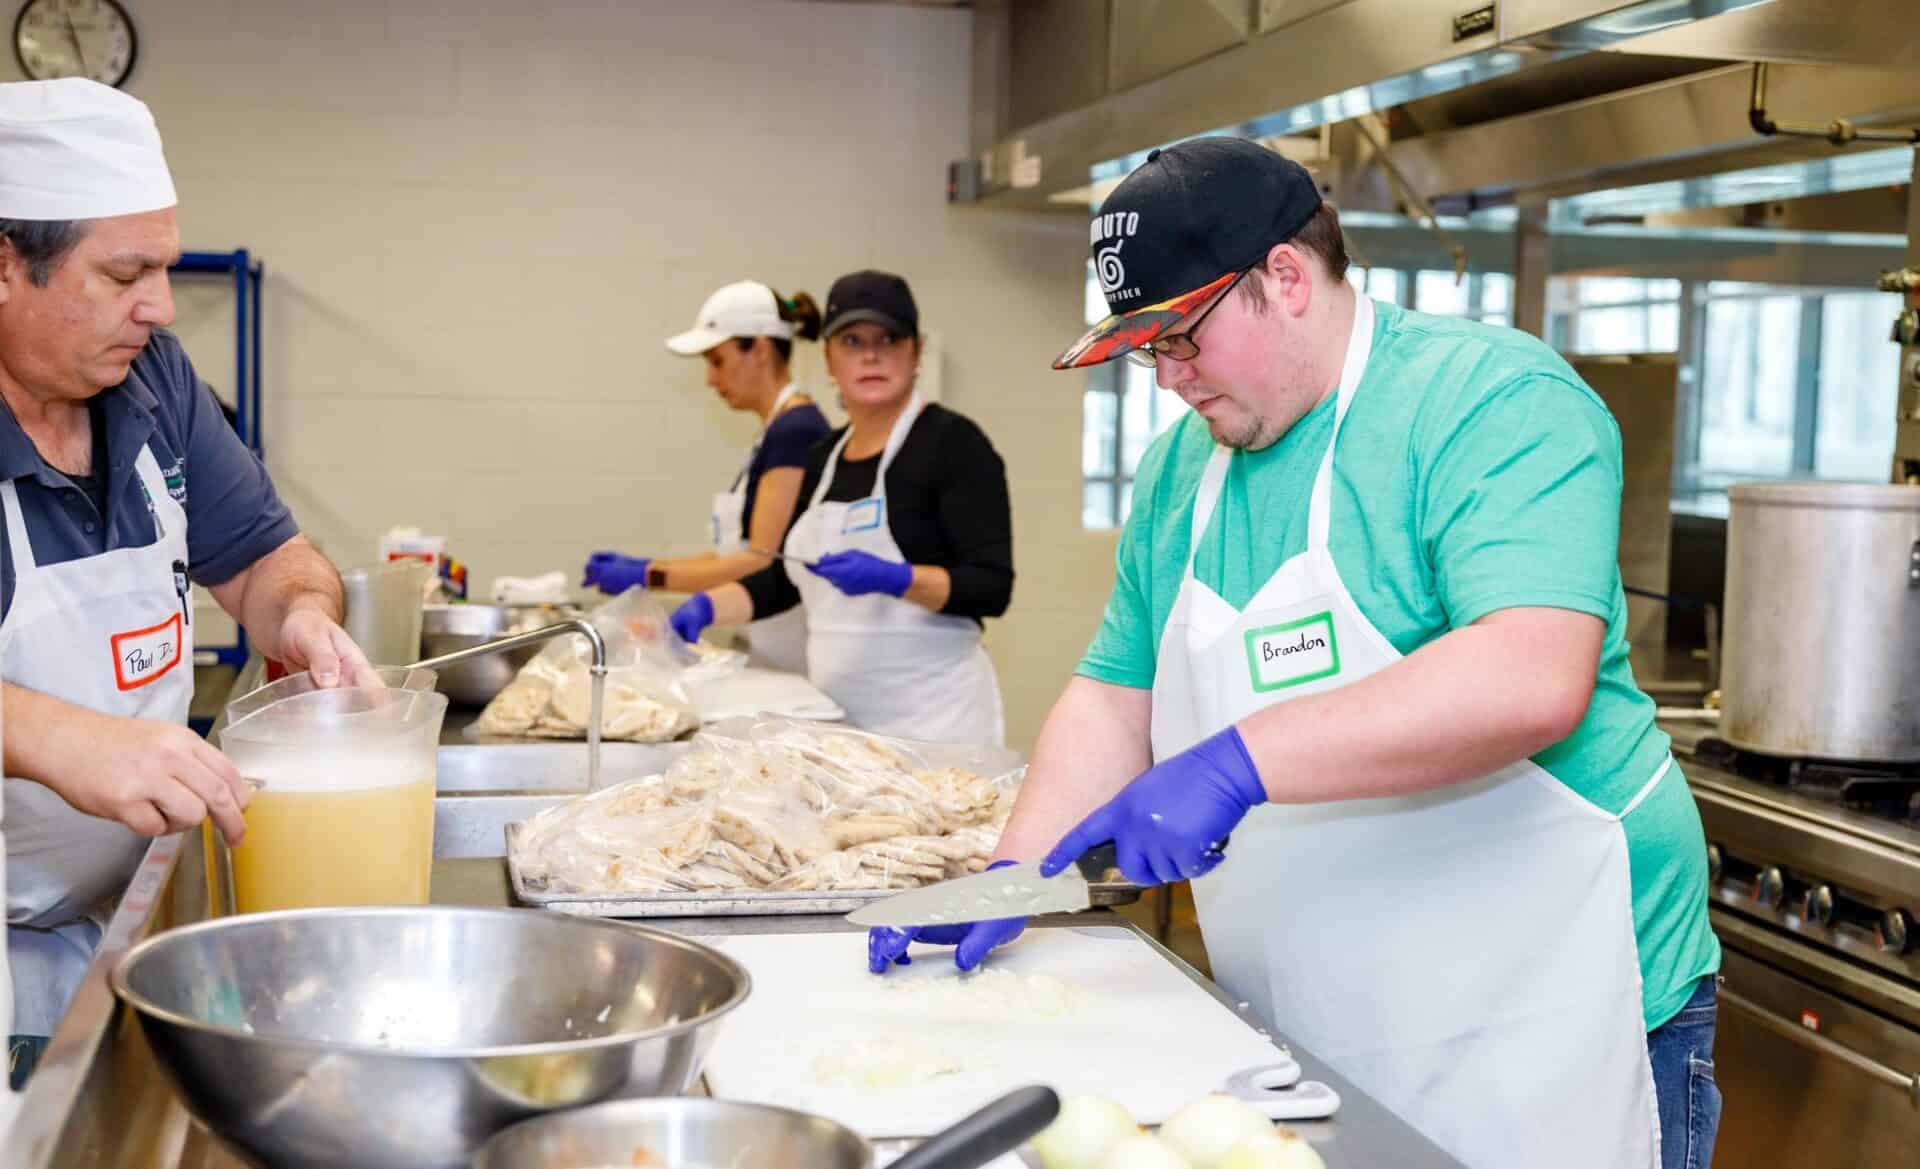 Student Brandon Brinkman and faculty members Wednesday Oster and Donna Von Deylen working in the kitchen